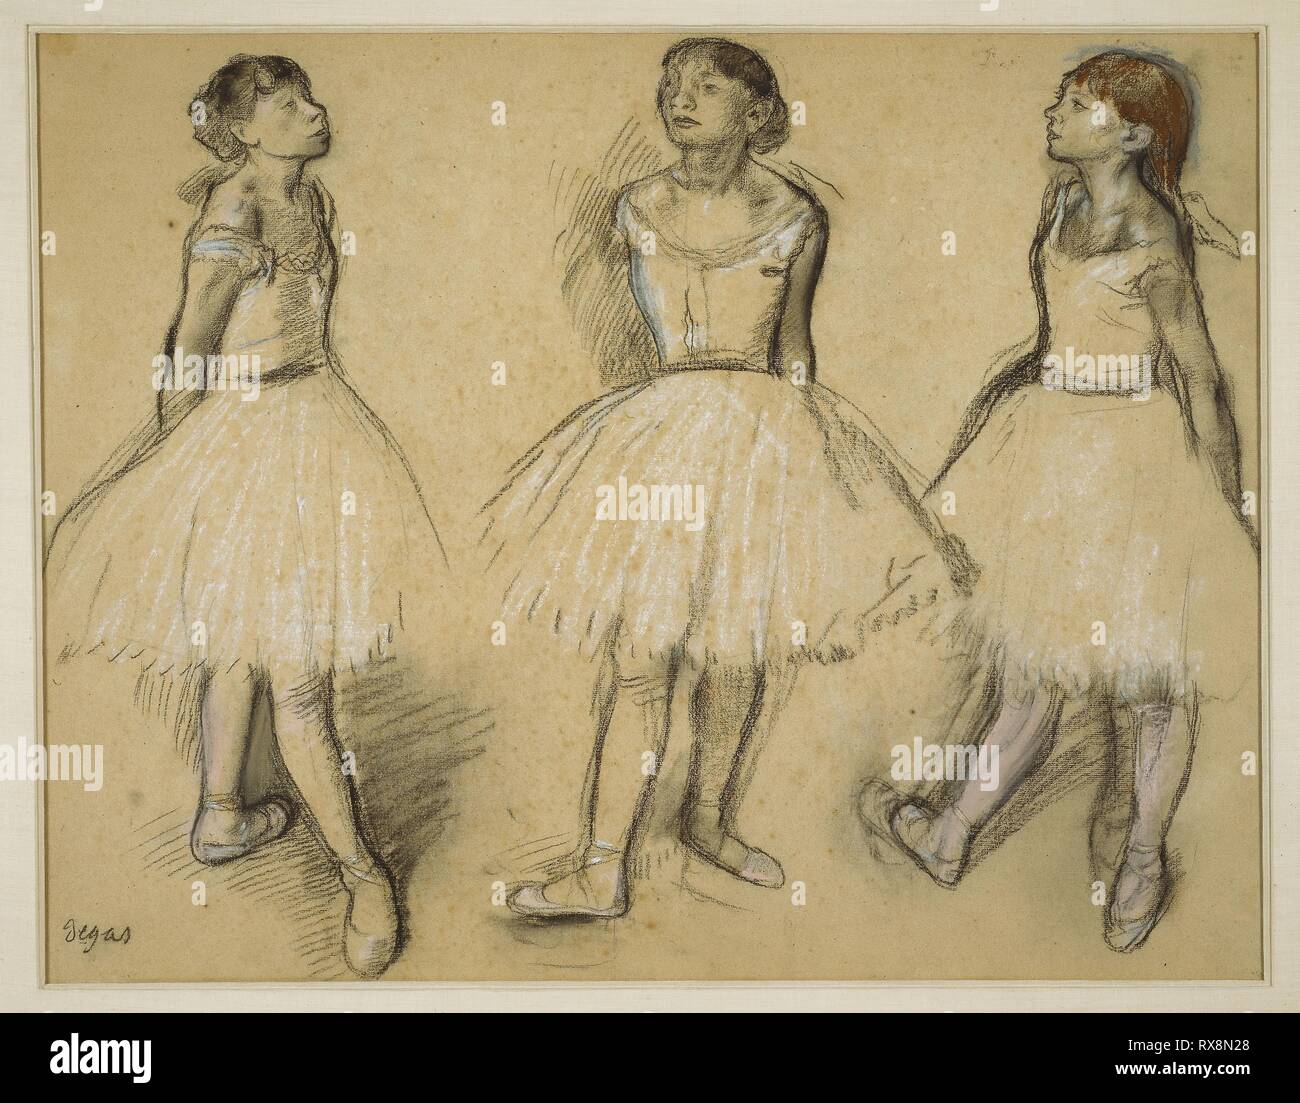 Three Studies Of A Dancer In Fourth Position Edgar Degas French 14 1917 Date 1879 10 Dimensions 480 616 Mm Charcoal And Pastel With Stumping And Touches Of Brush And Black Wash On